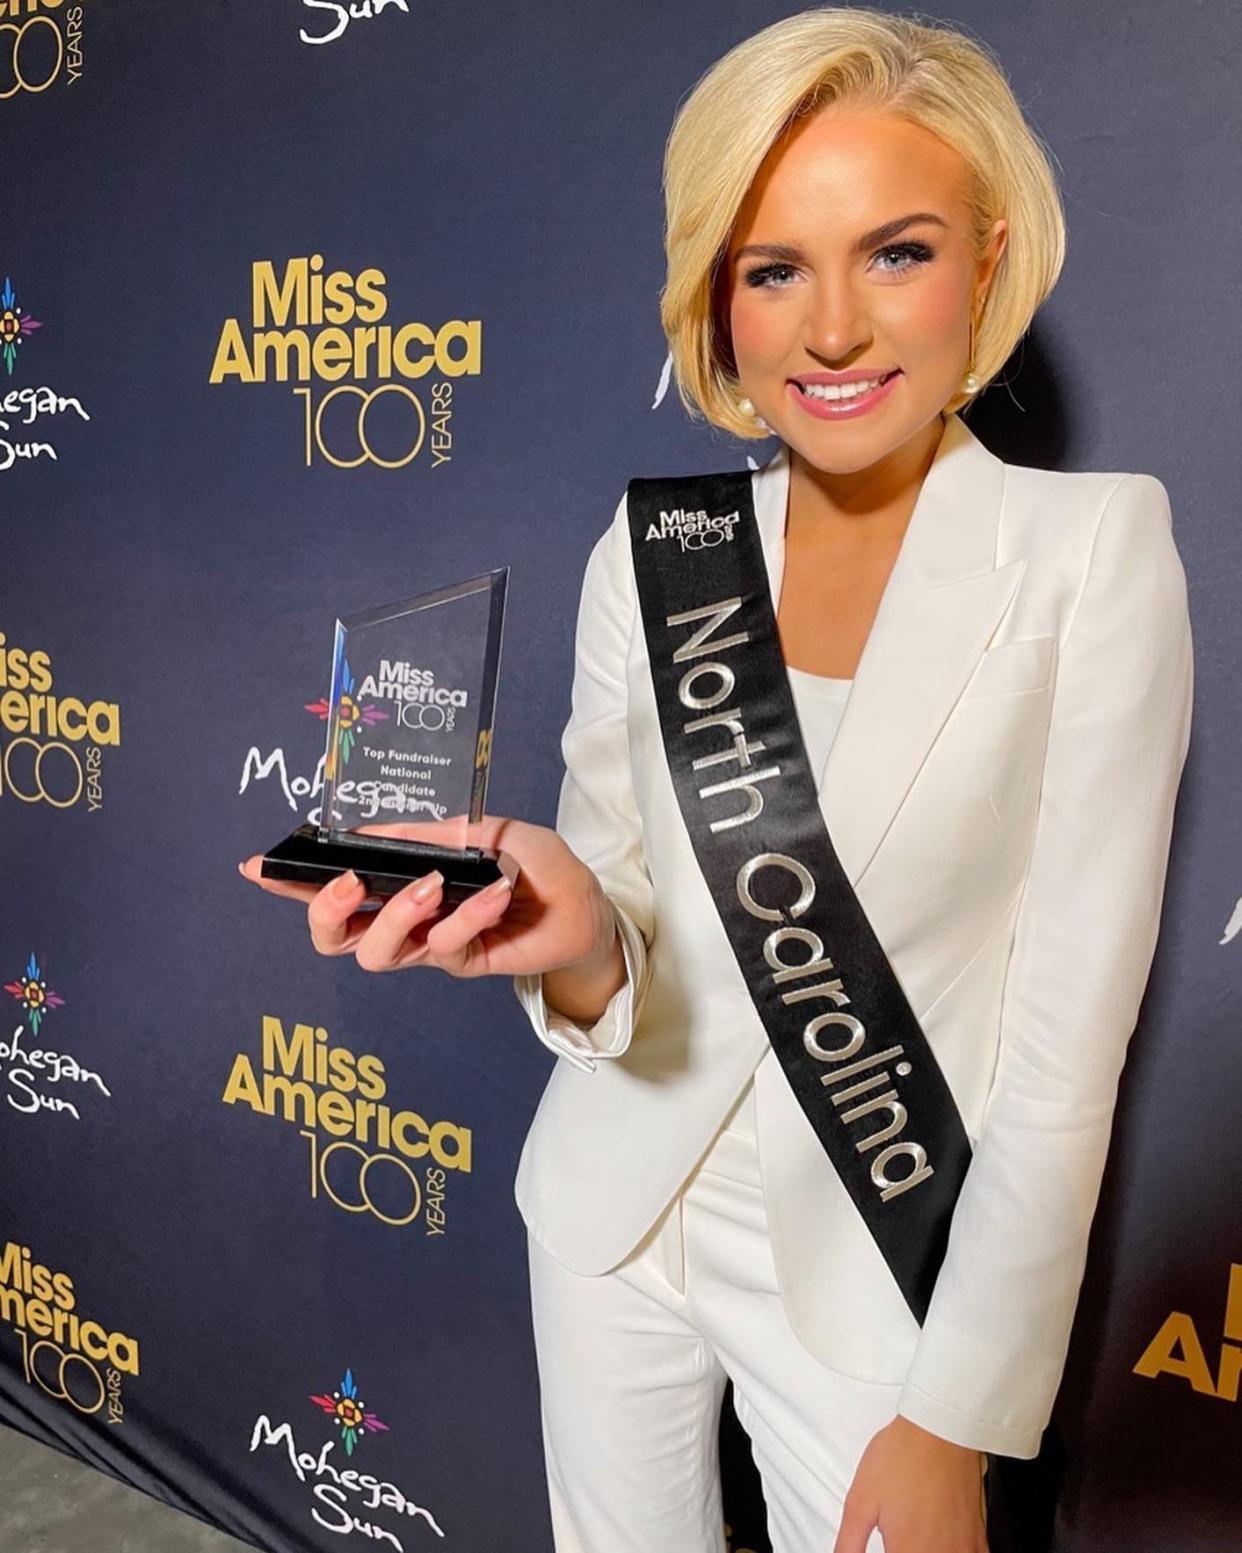 Carli Batson won $1,000 in scholarship money as the second runner-up for the Miss America top fundraiser this week. On Dec. 16, she'll compete for the Miss America crown at the Mohegan Sun resort in Connecticut.